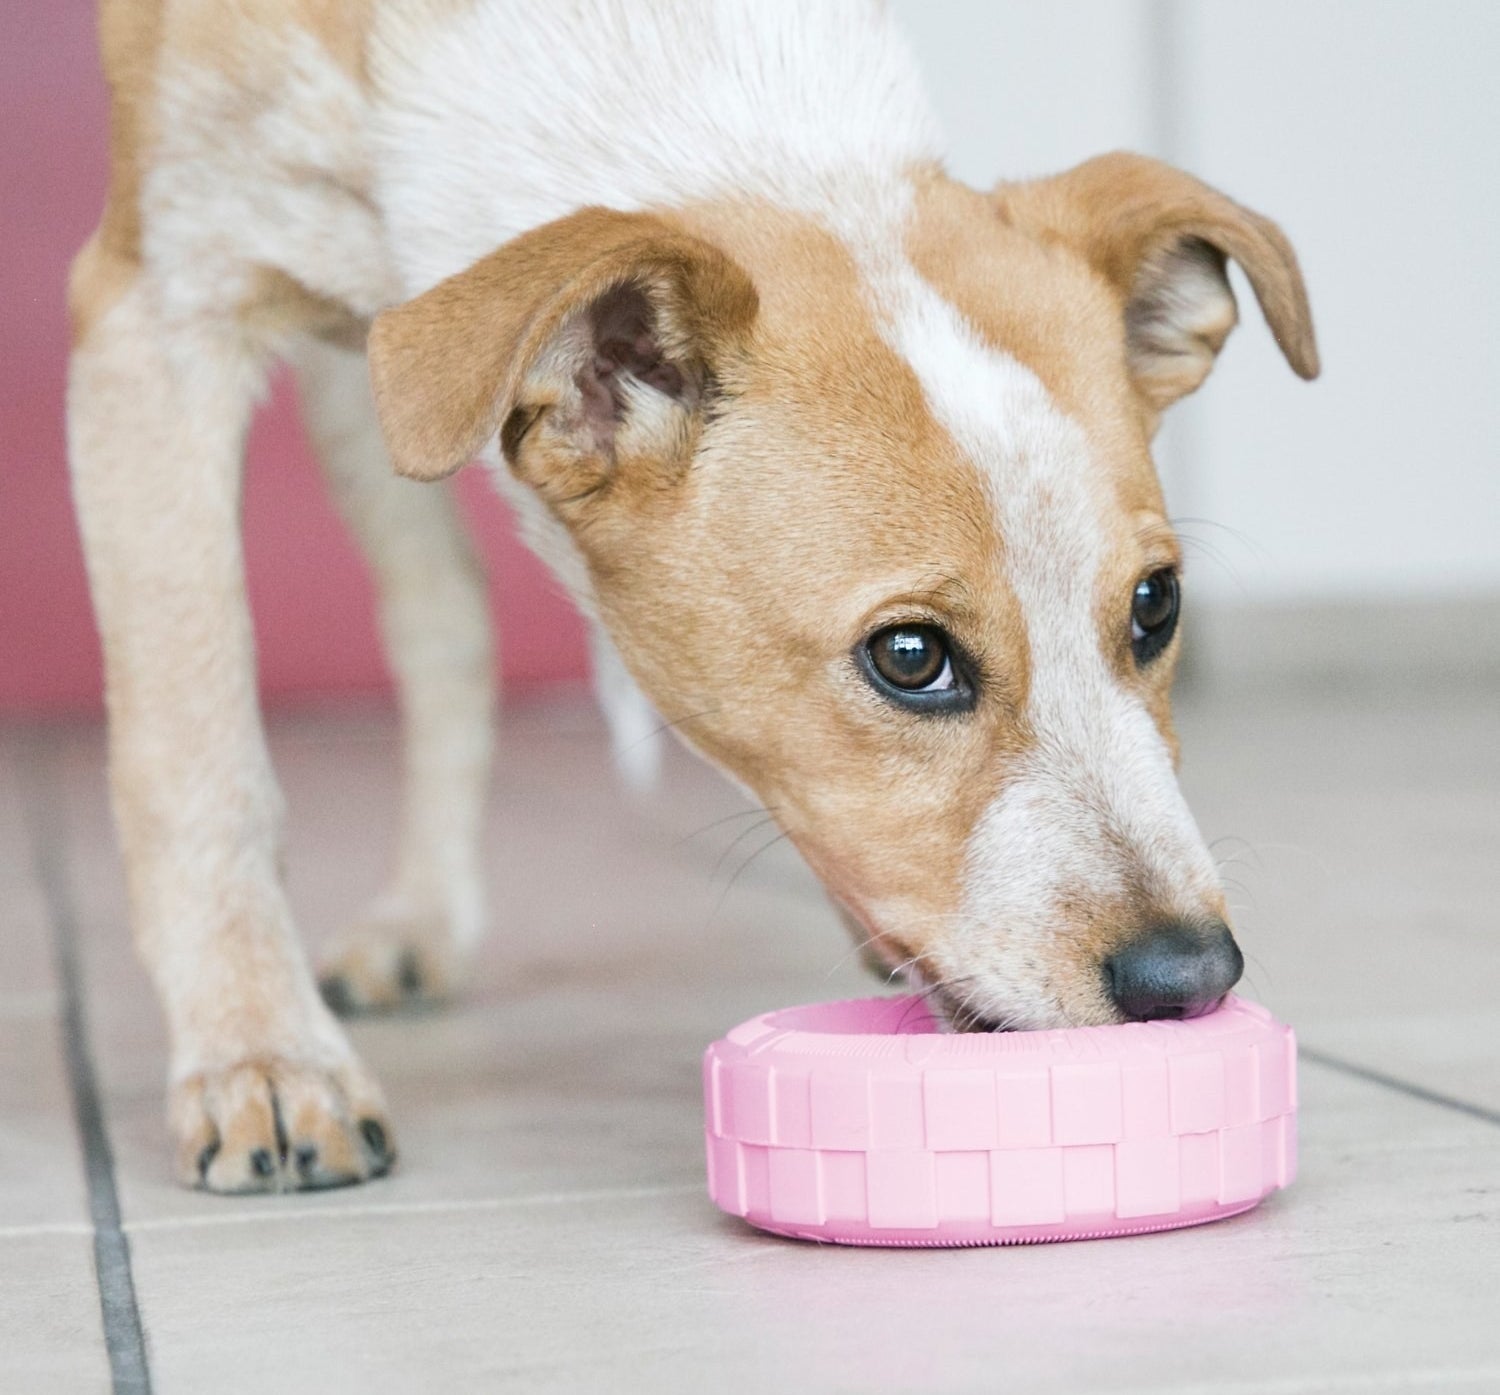 Dog chewing on pink tire-inspired chew toy